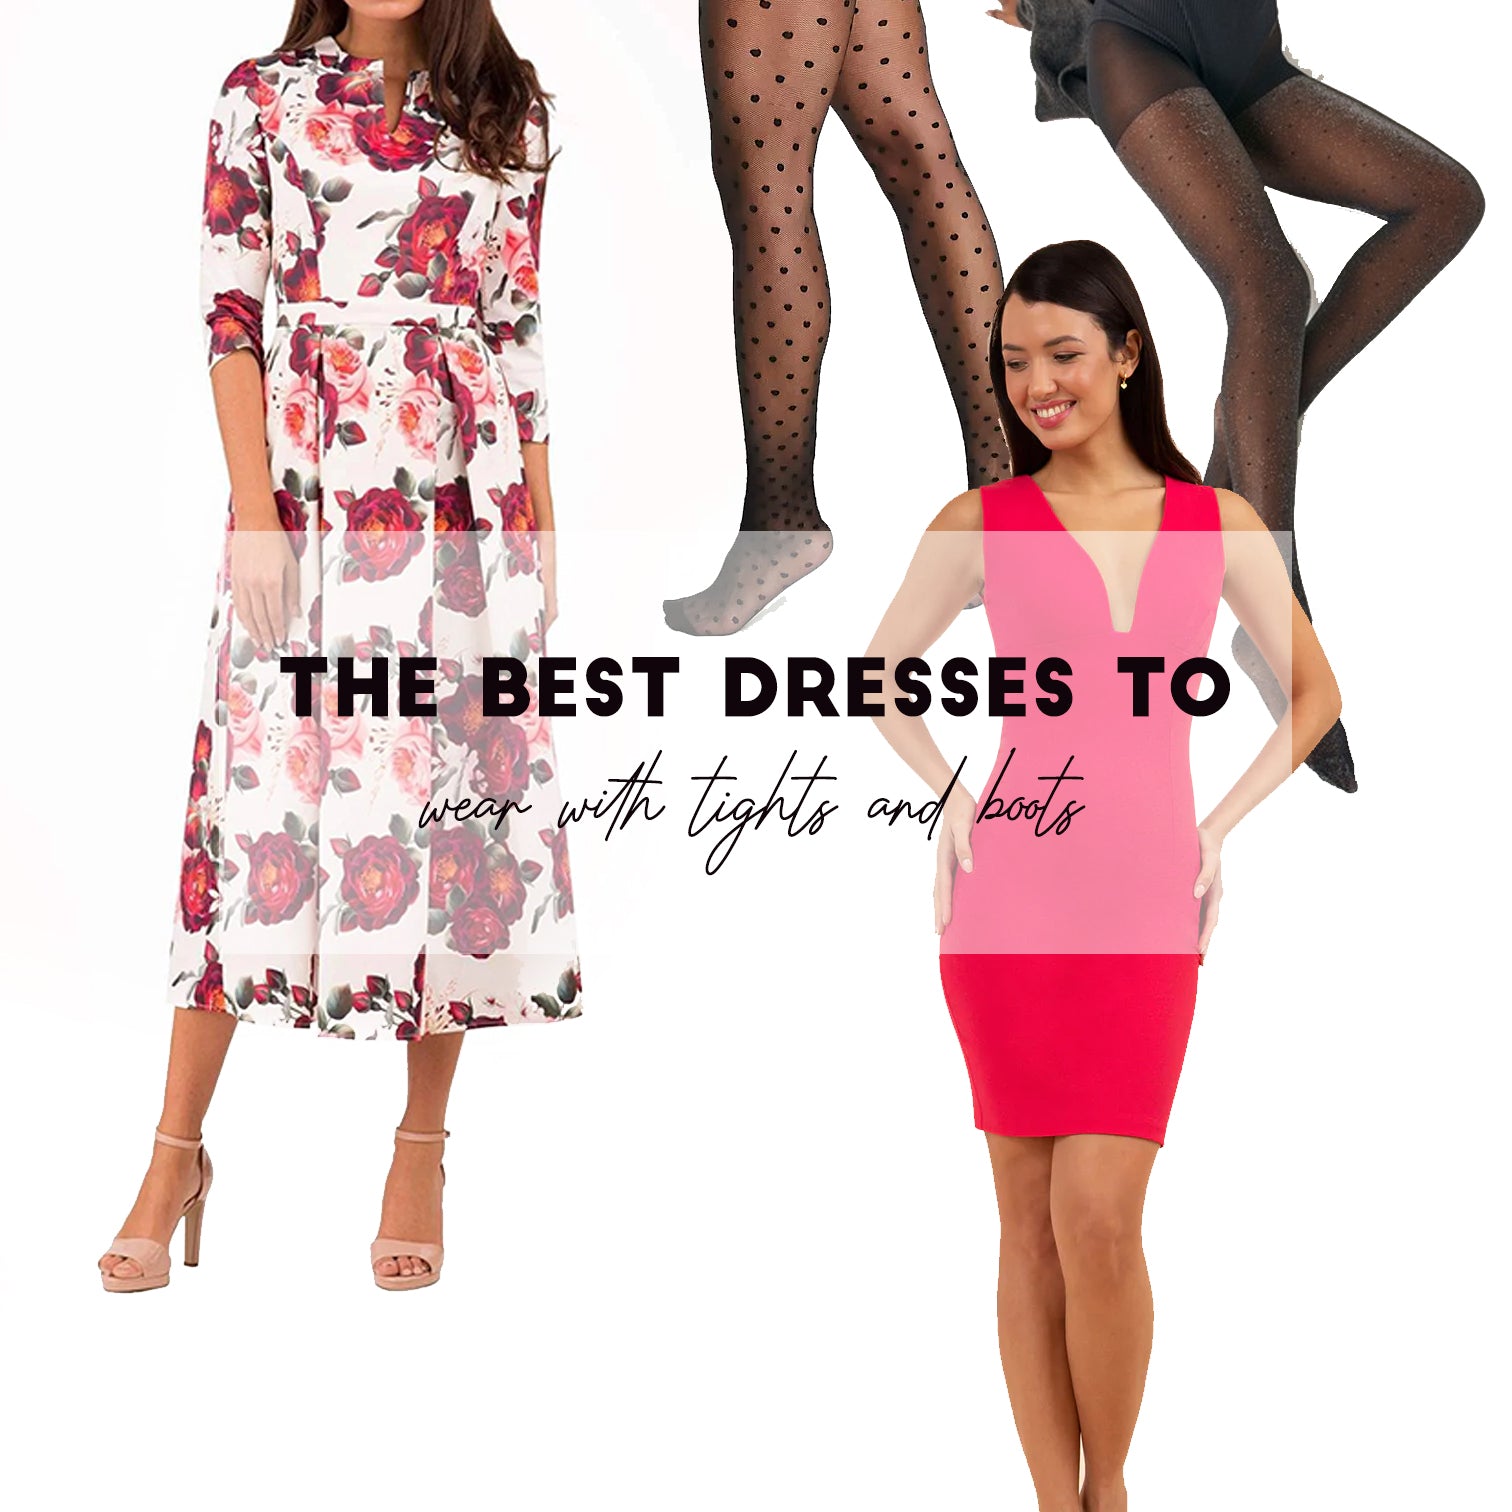 I Can't Wait to Pair These Bestselling Tights With My Holiday Dress